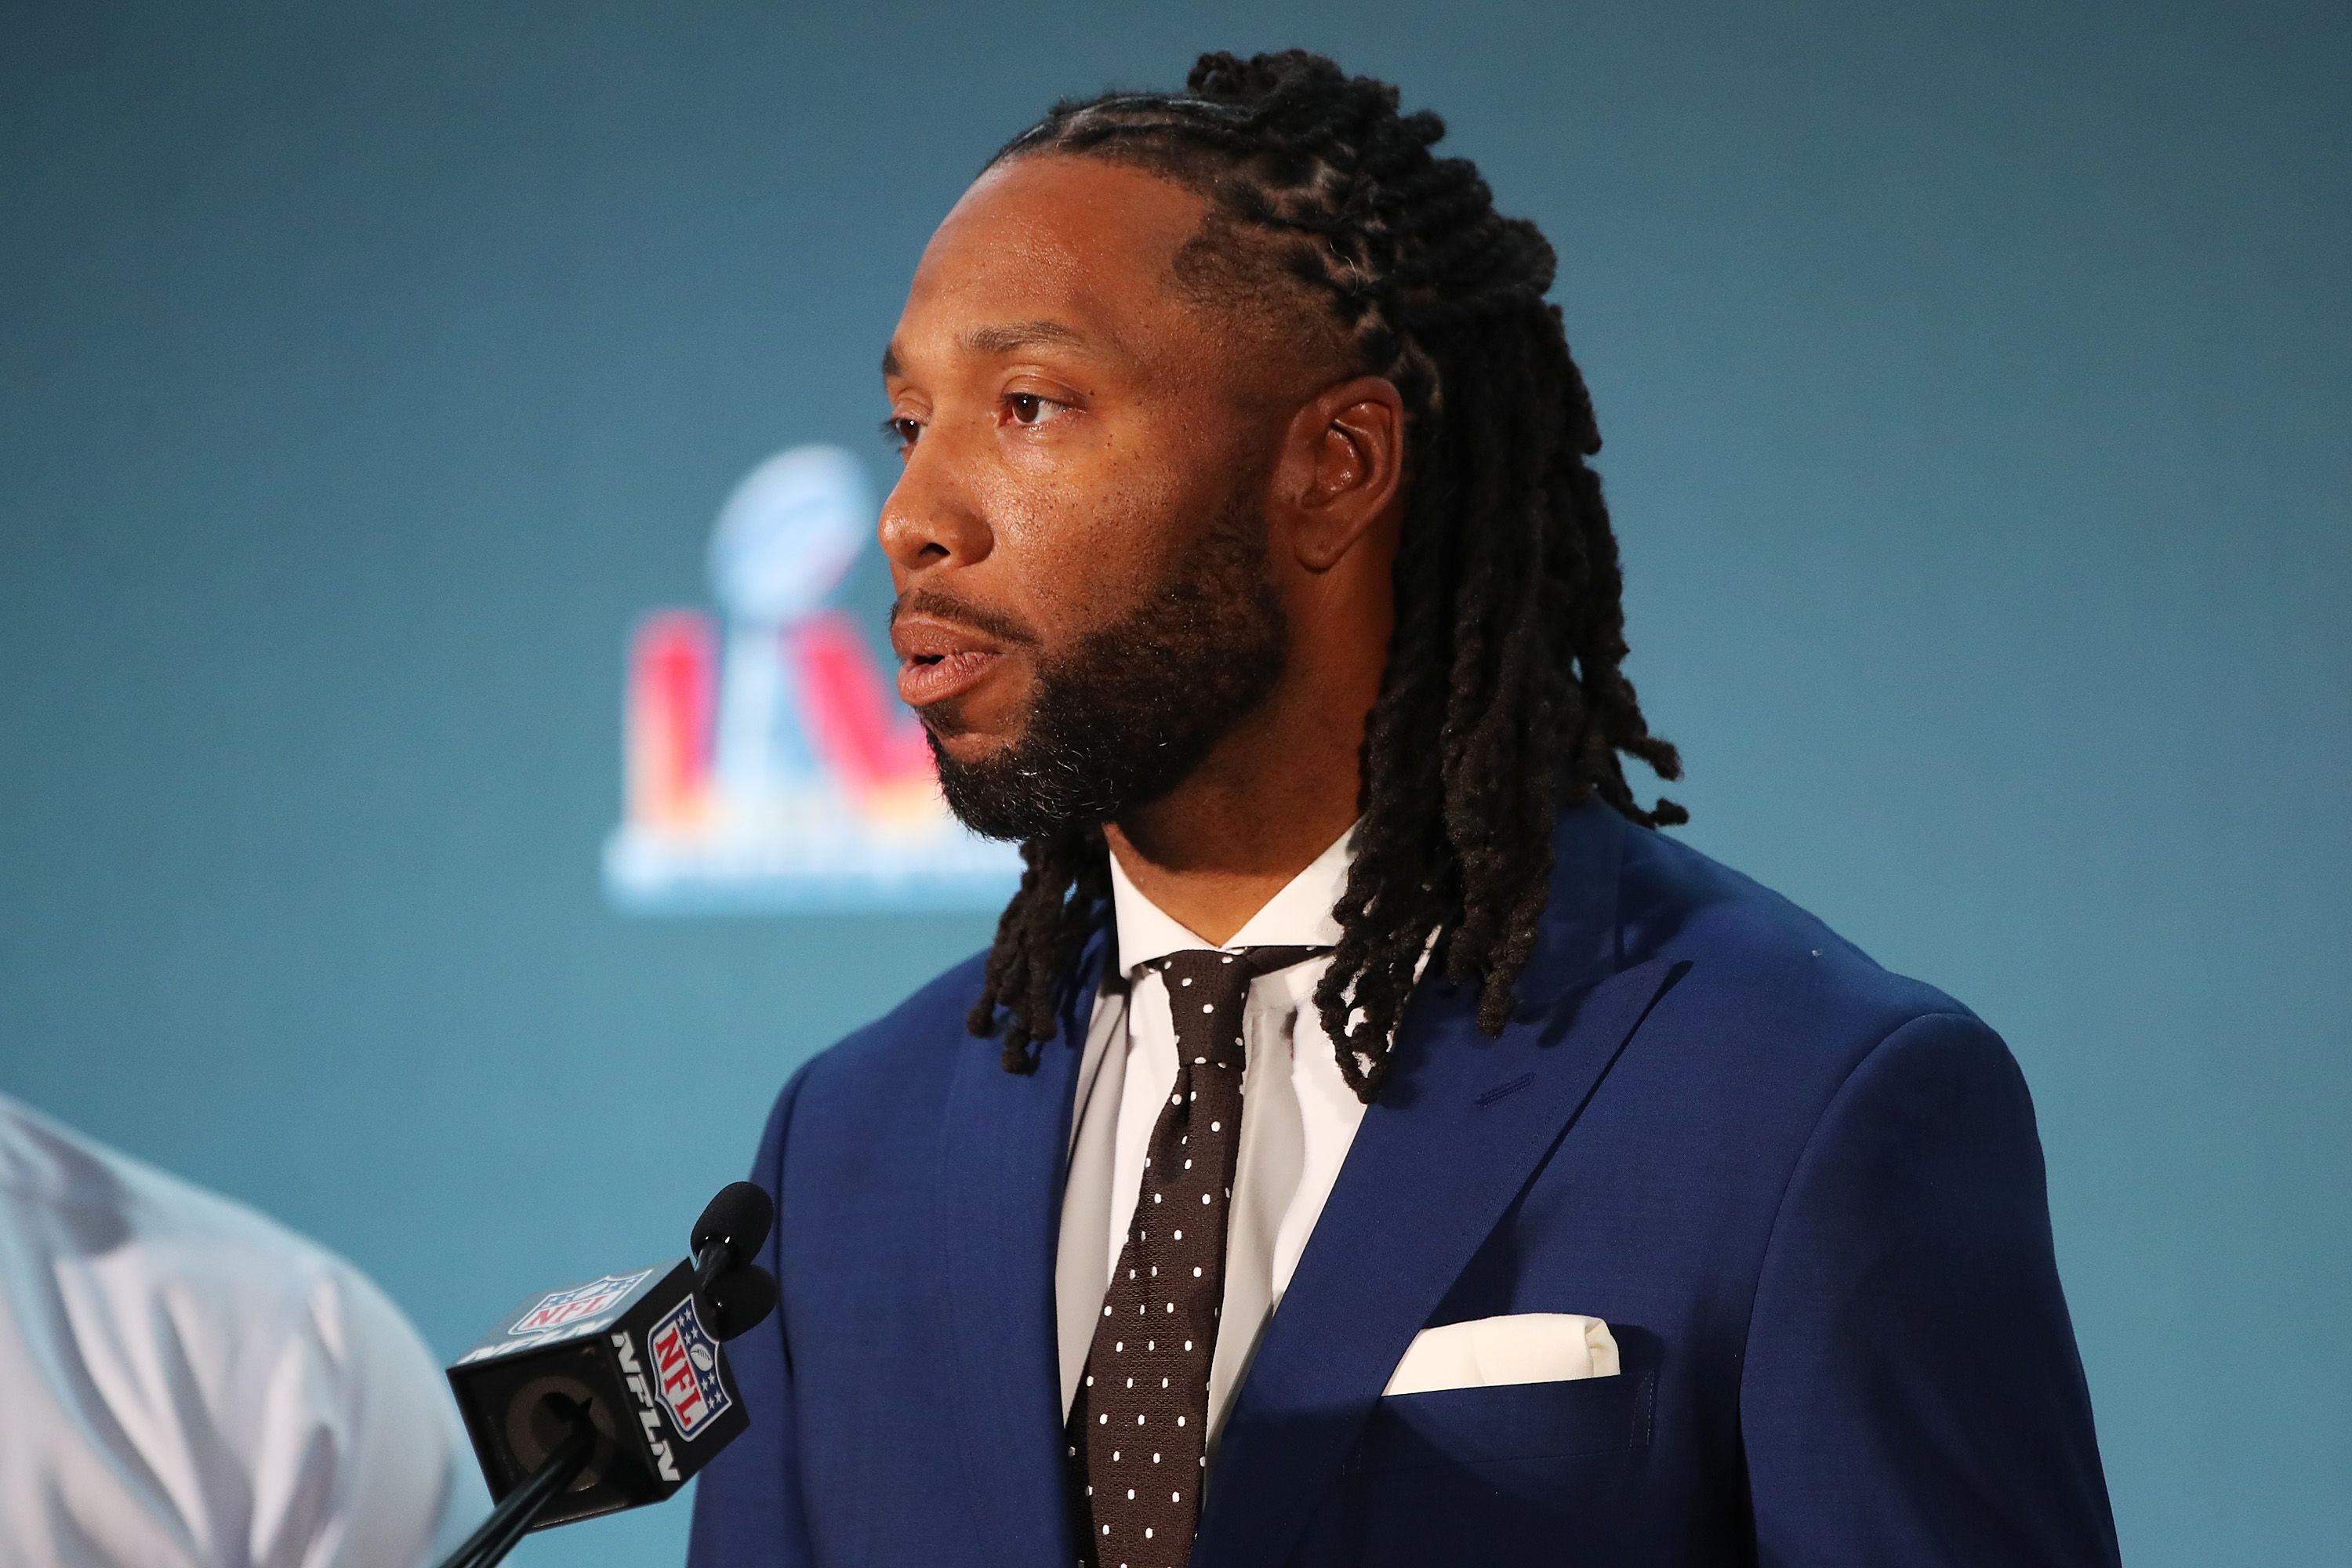 Larry Fitzgerald elaborates on decision not to continue playing